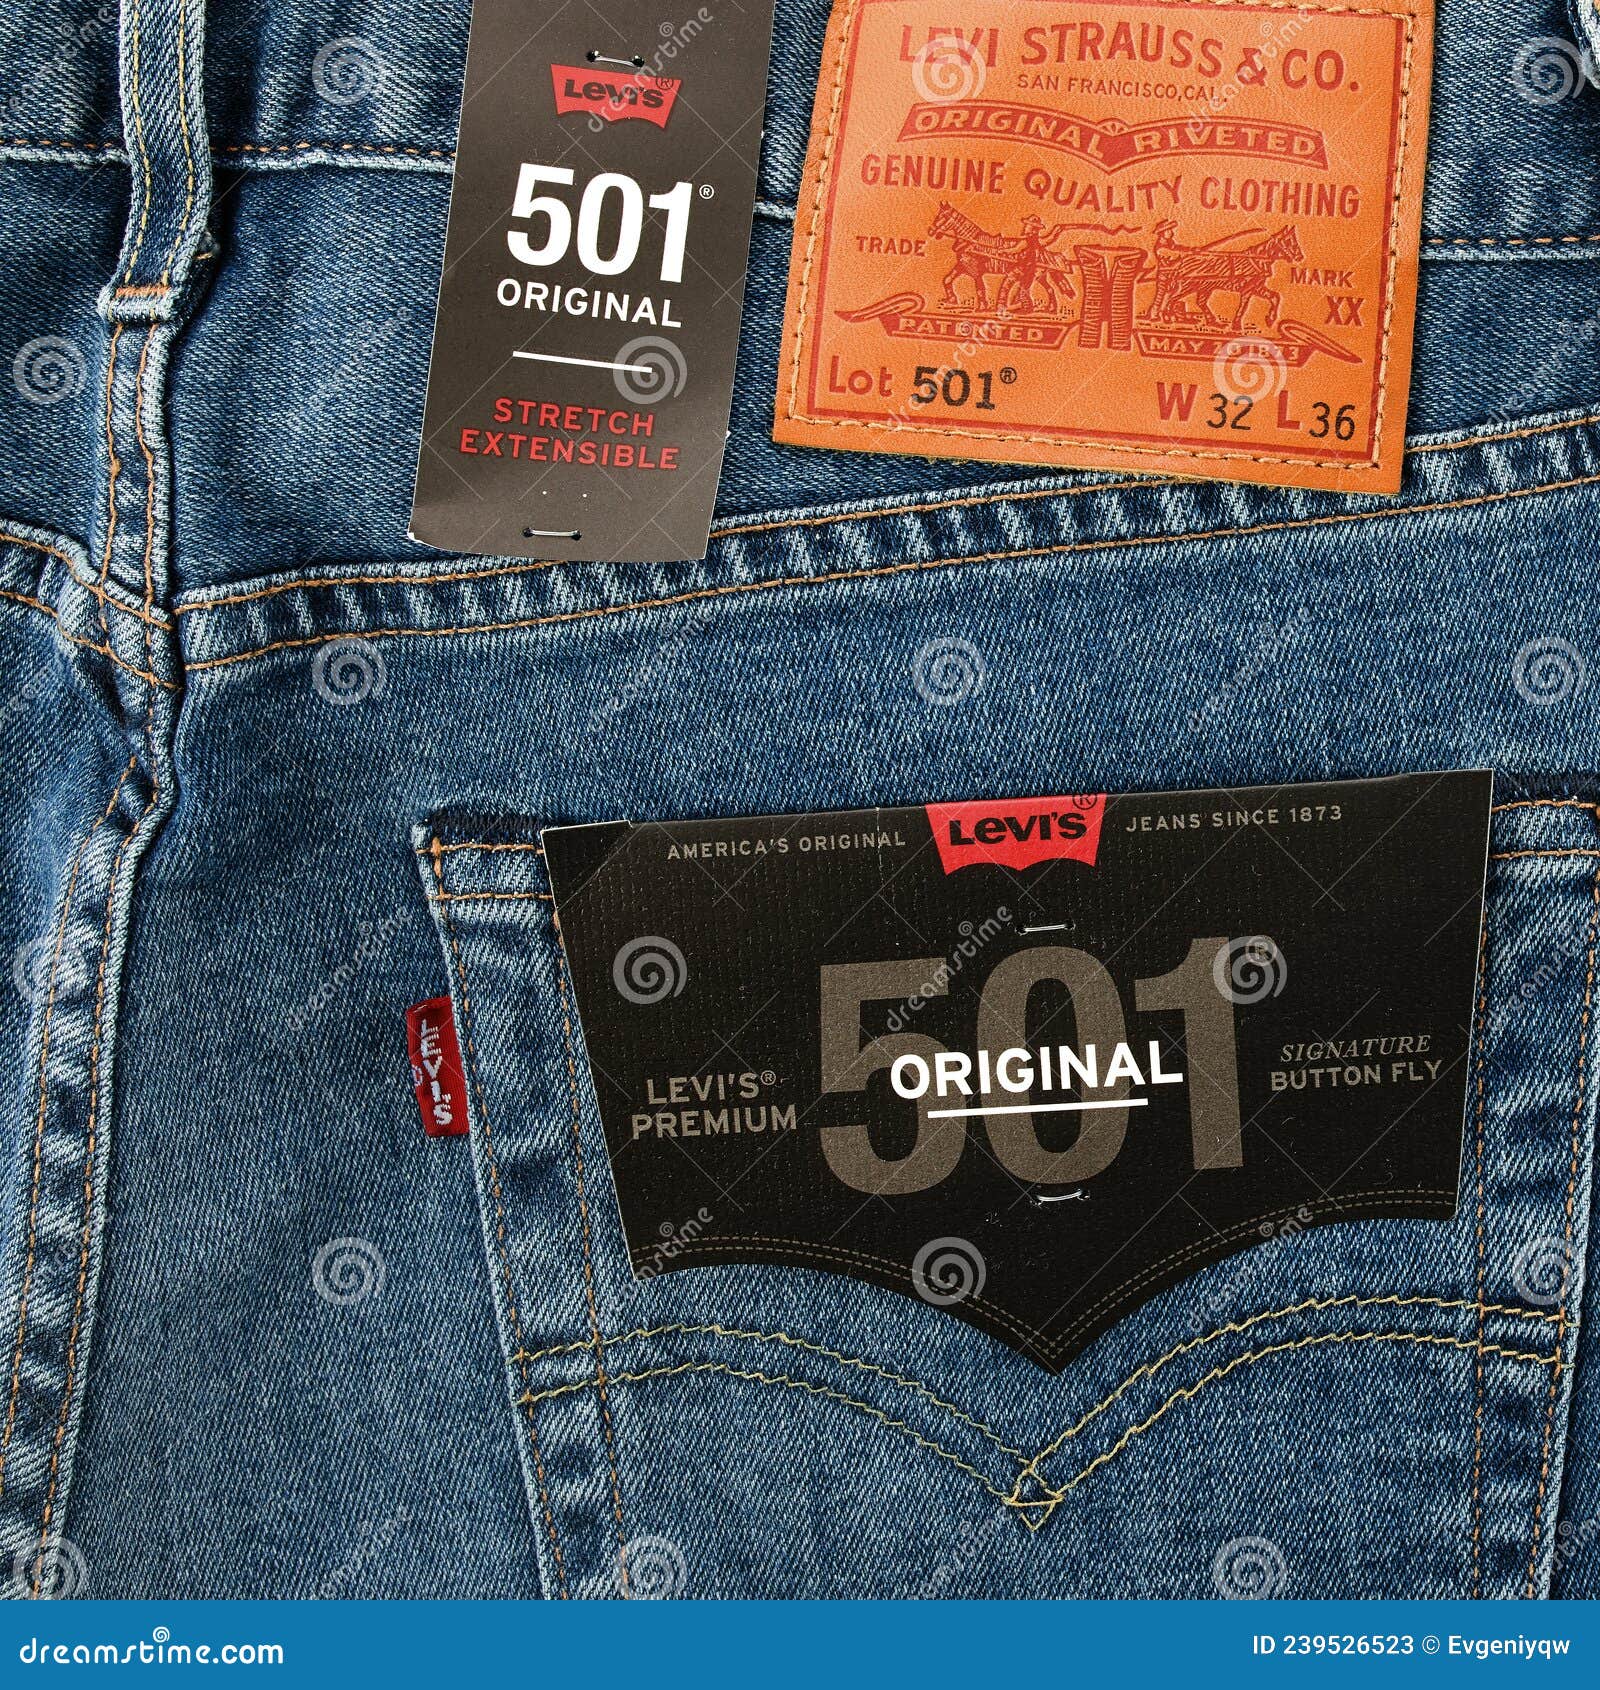 Levi S Logo and Badges is Displayed on Levi Strauss 501 Jeans. New LEVI S 501 Jeans Editorial Stock Photo - of label, traditional: 239526523